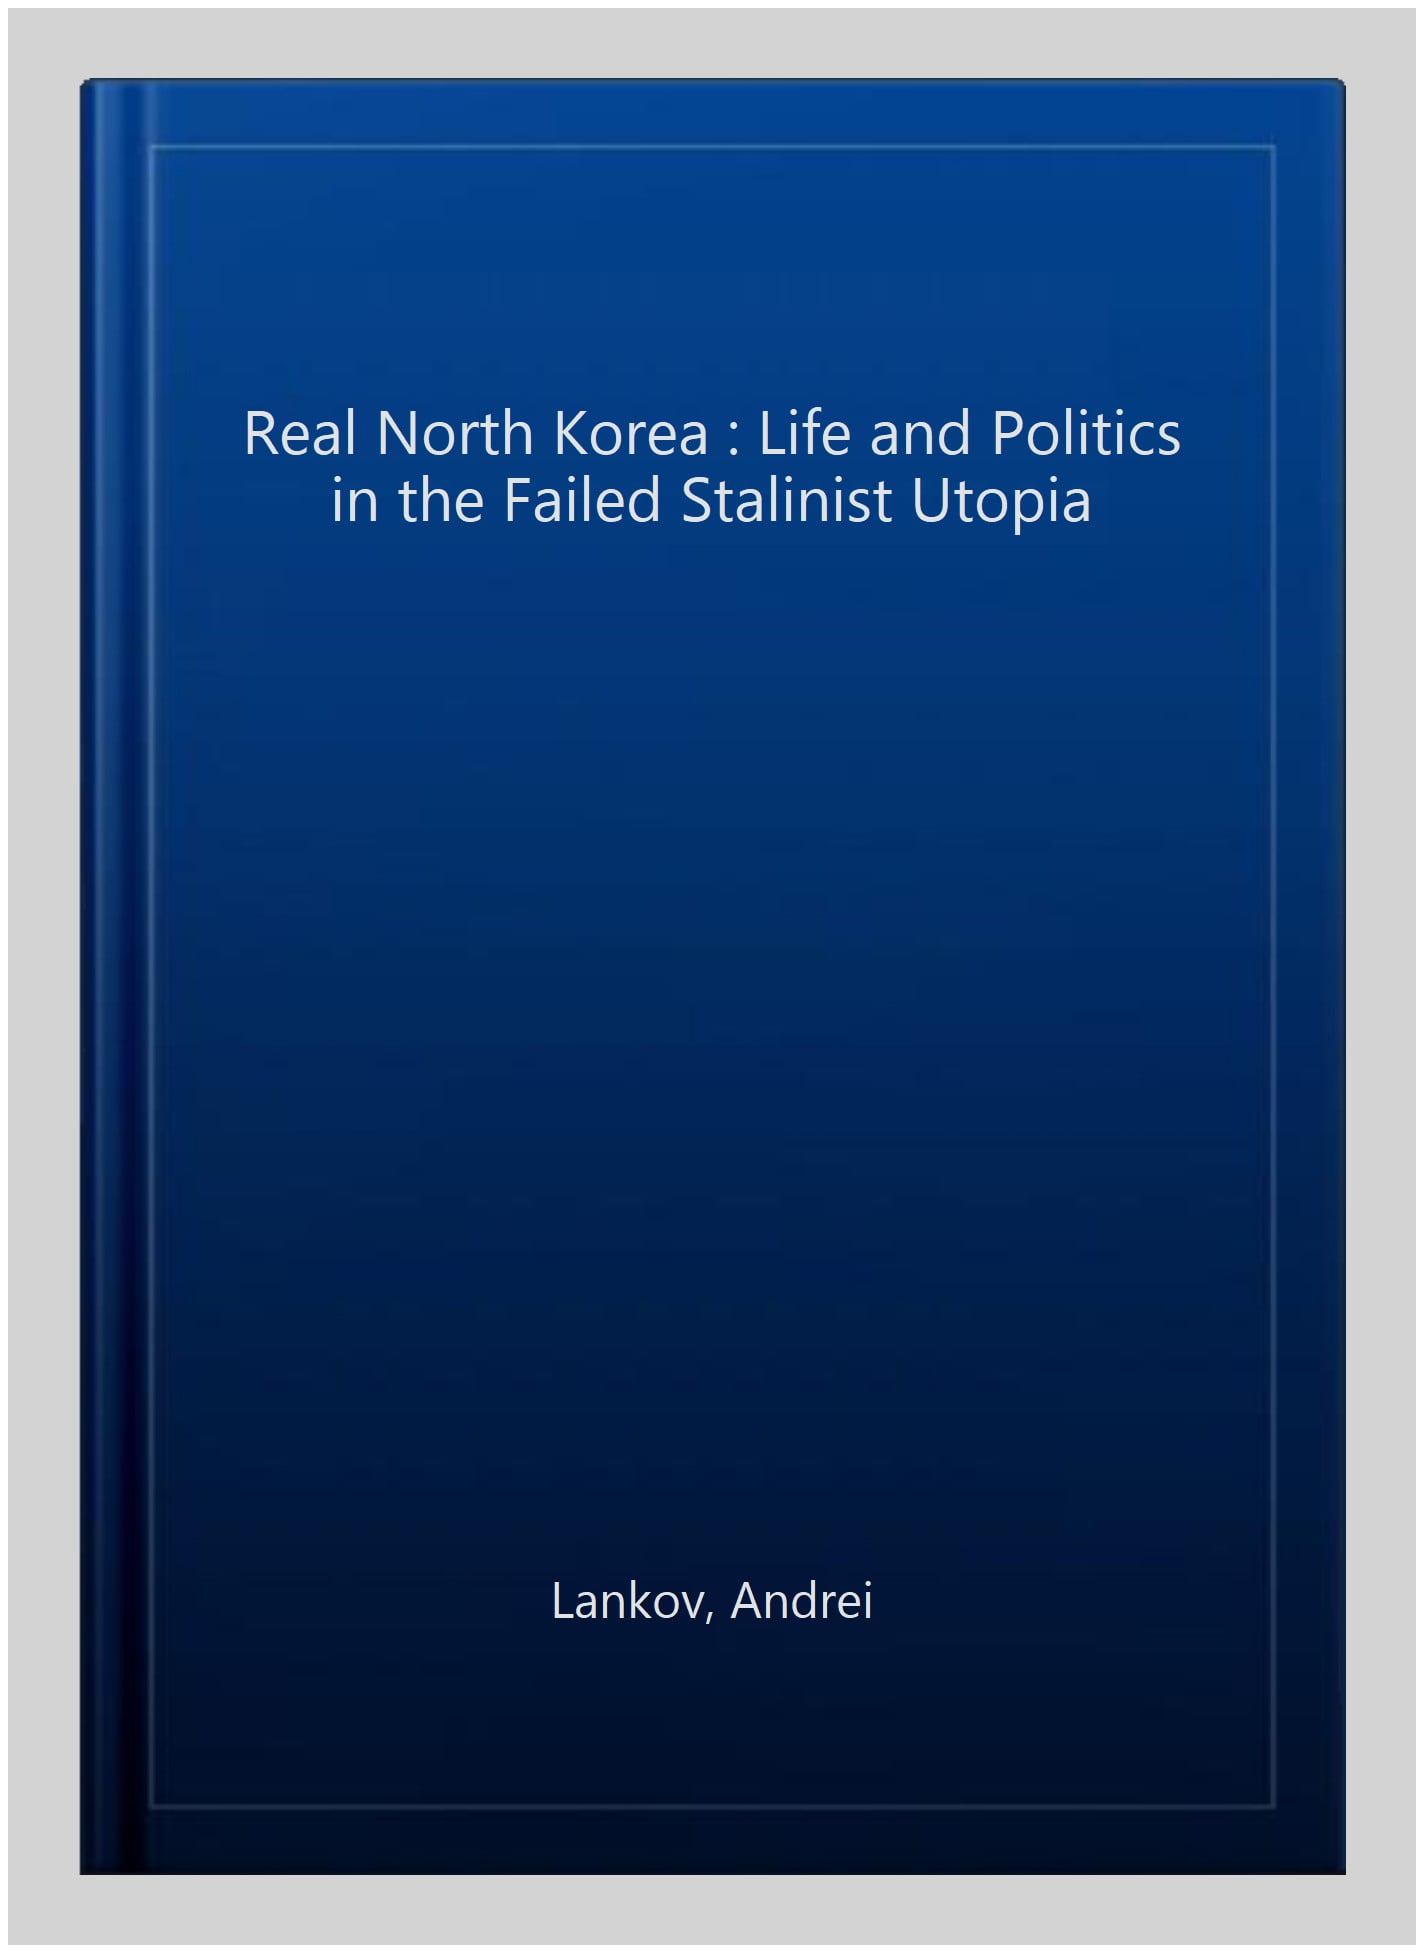 North　the　Pre-owned　in　Life　0199390037,　Real　9780199390038　Paperback　ISBN-13　Politics　Korea　Stalinist　and　Failed　Lankov,　Andrei,　Utopia,　by　ISBN